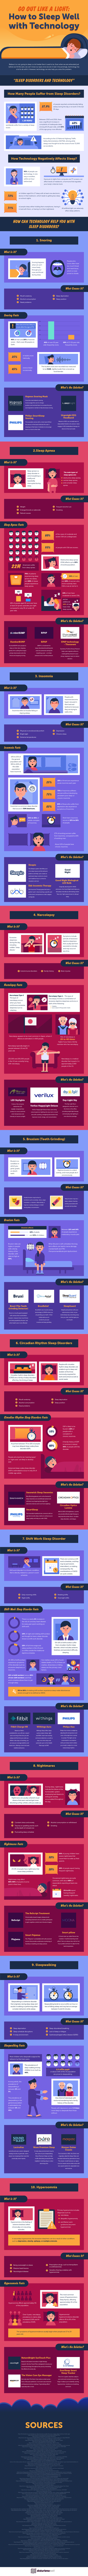 infographic-sleep-well-with-technology (1).png